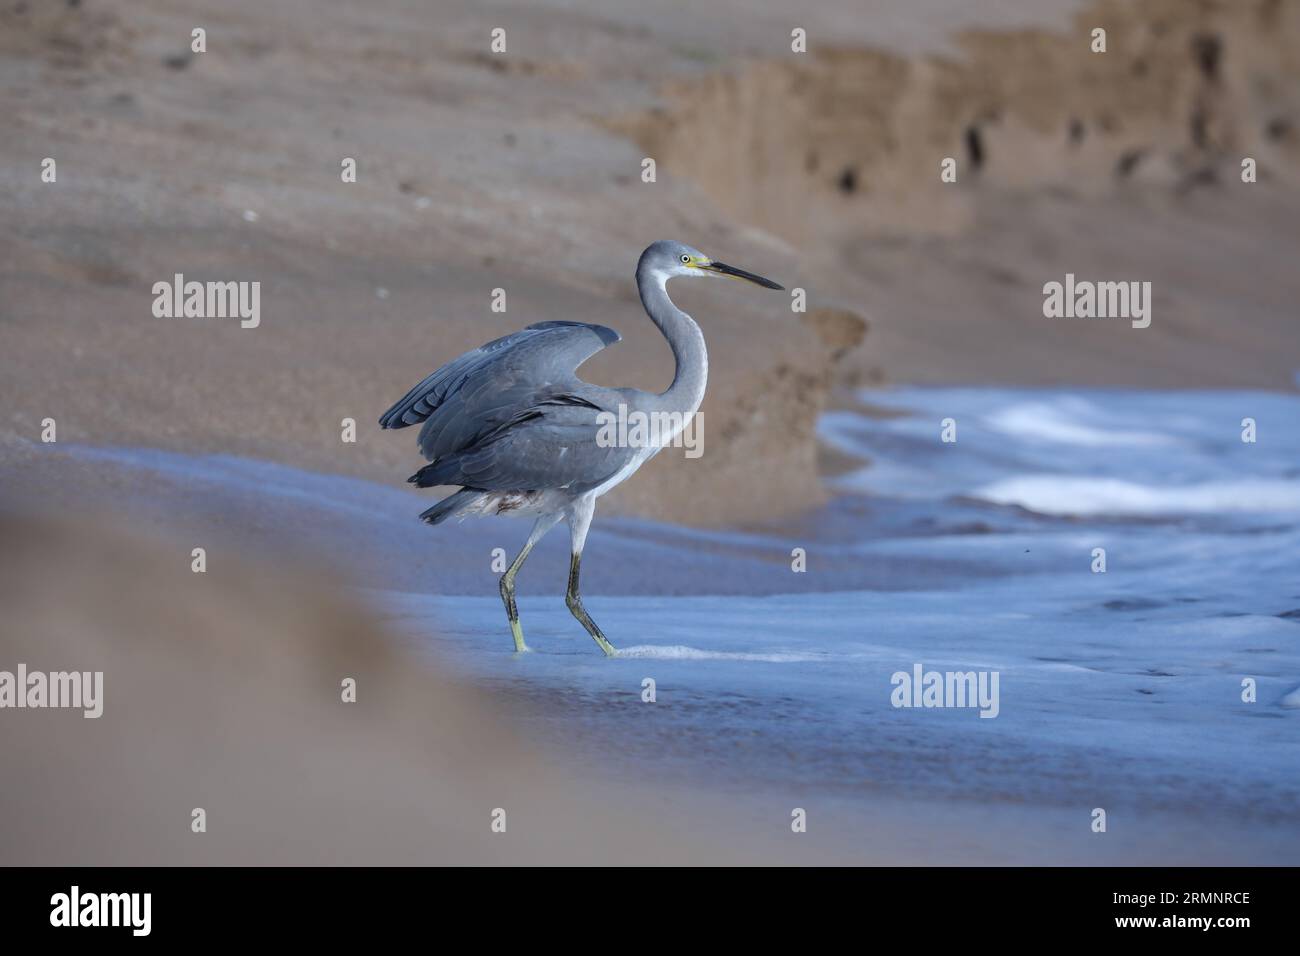 A majestic great blue heron standing on the shoreline of a sandy beach, its long bill and neck stretched forward as it surveys its surroundings Stock Photo